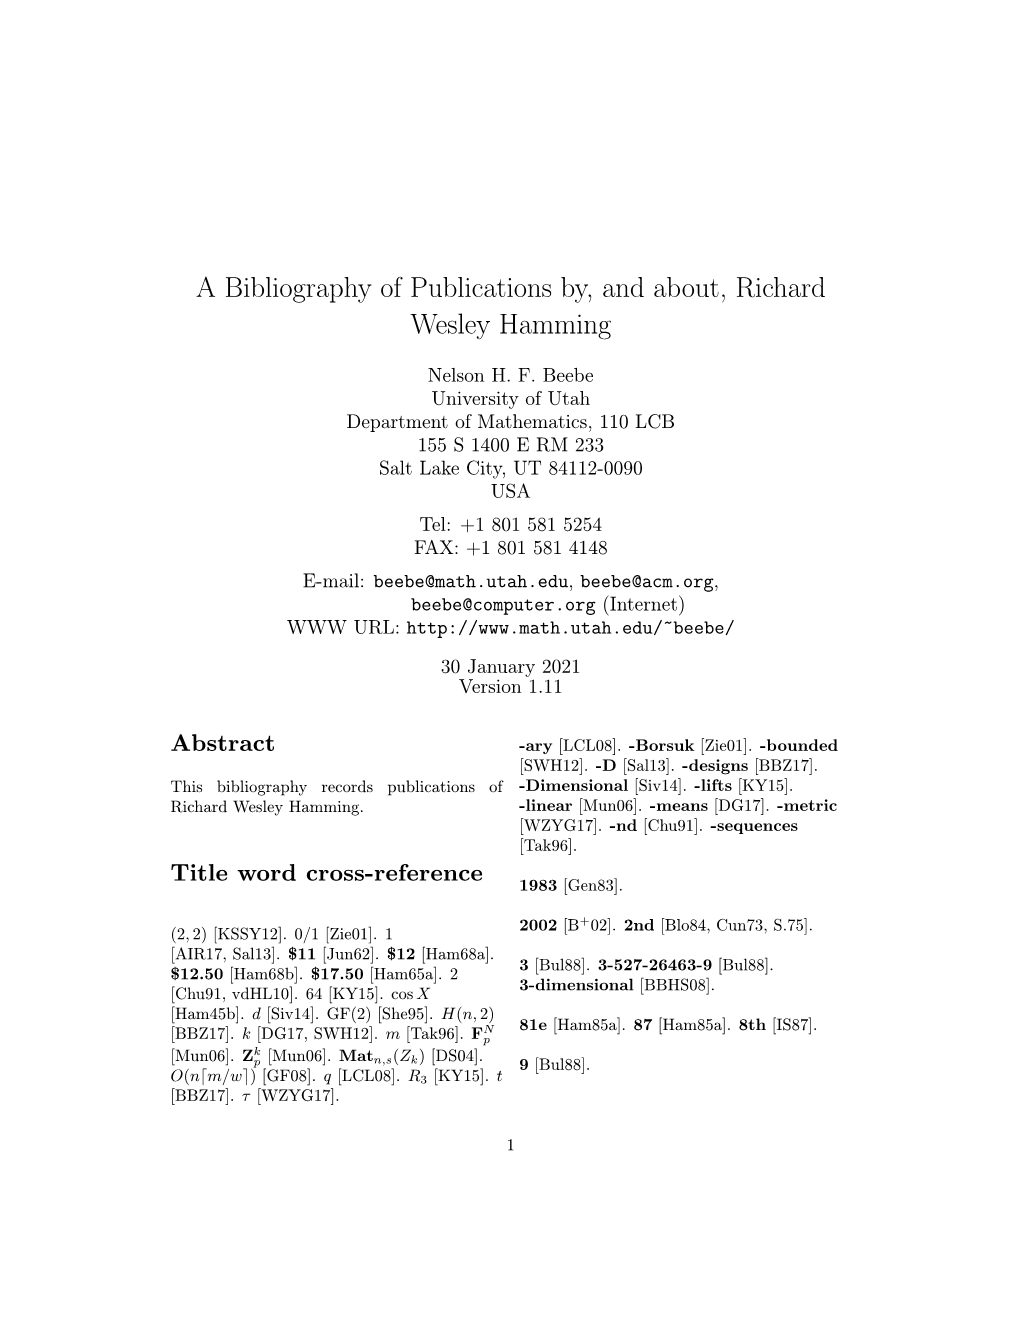 A Bibliography of Publications By, and About, Richard Wesley Hamming